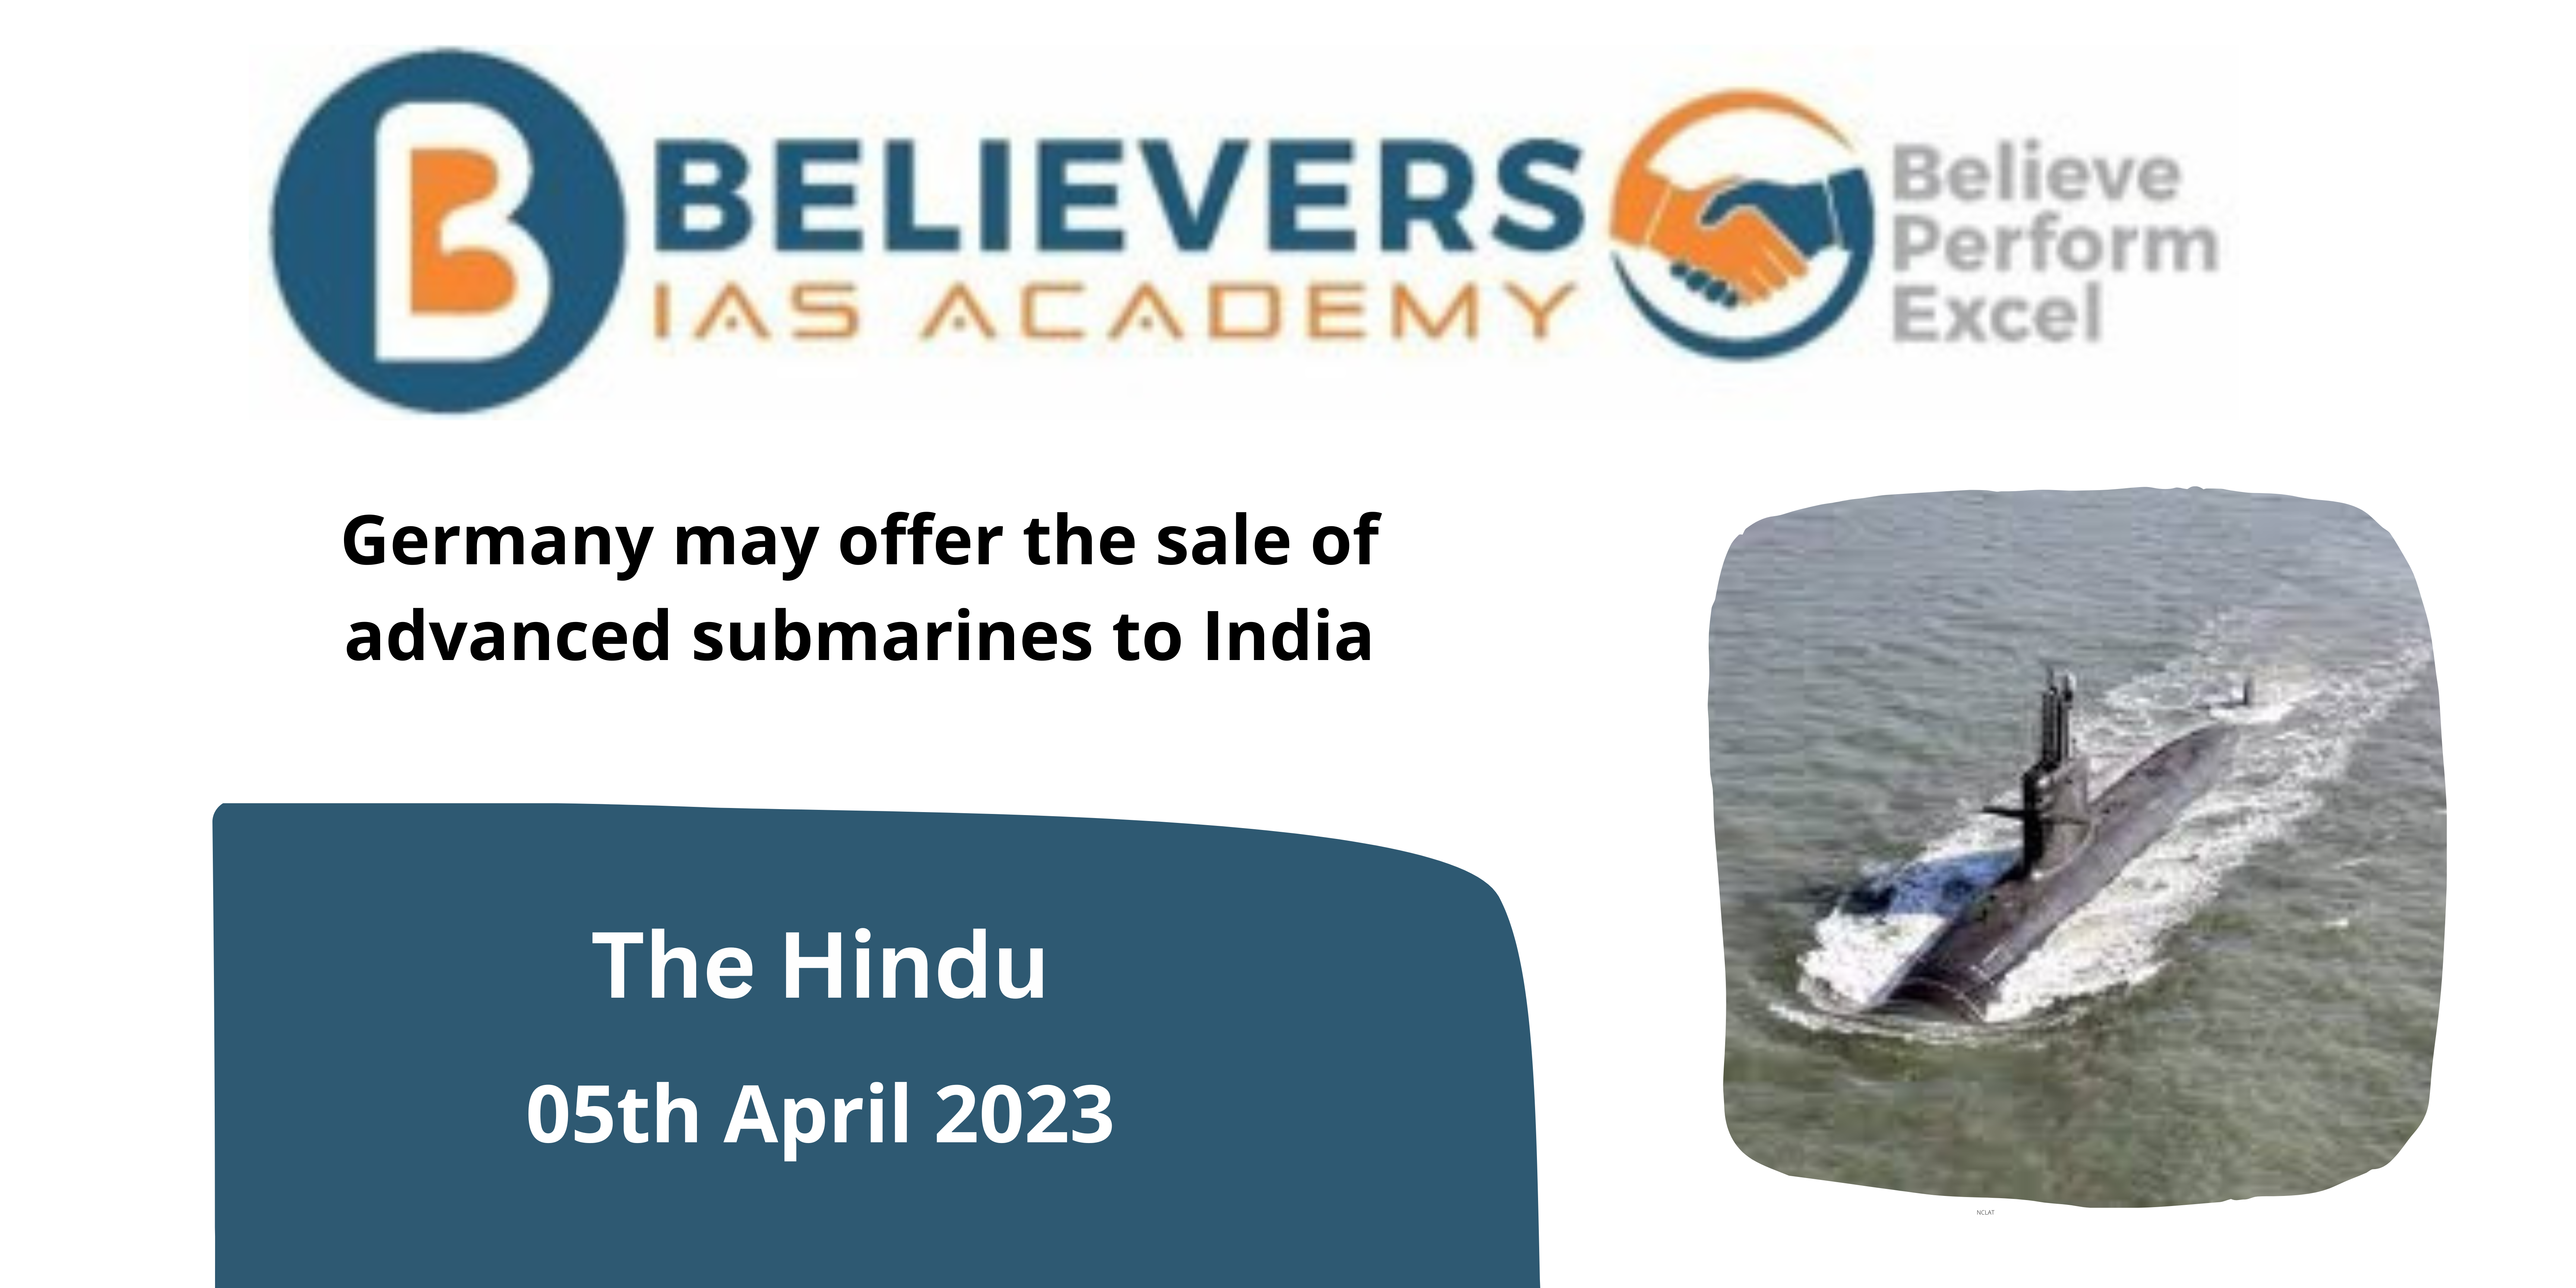 Germany may offer the sale of advanced submarines to India